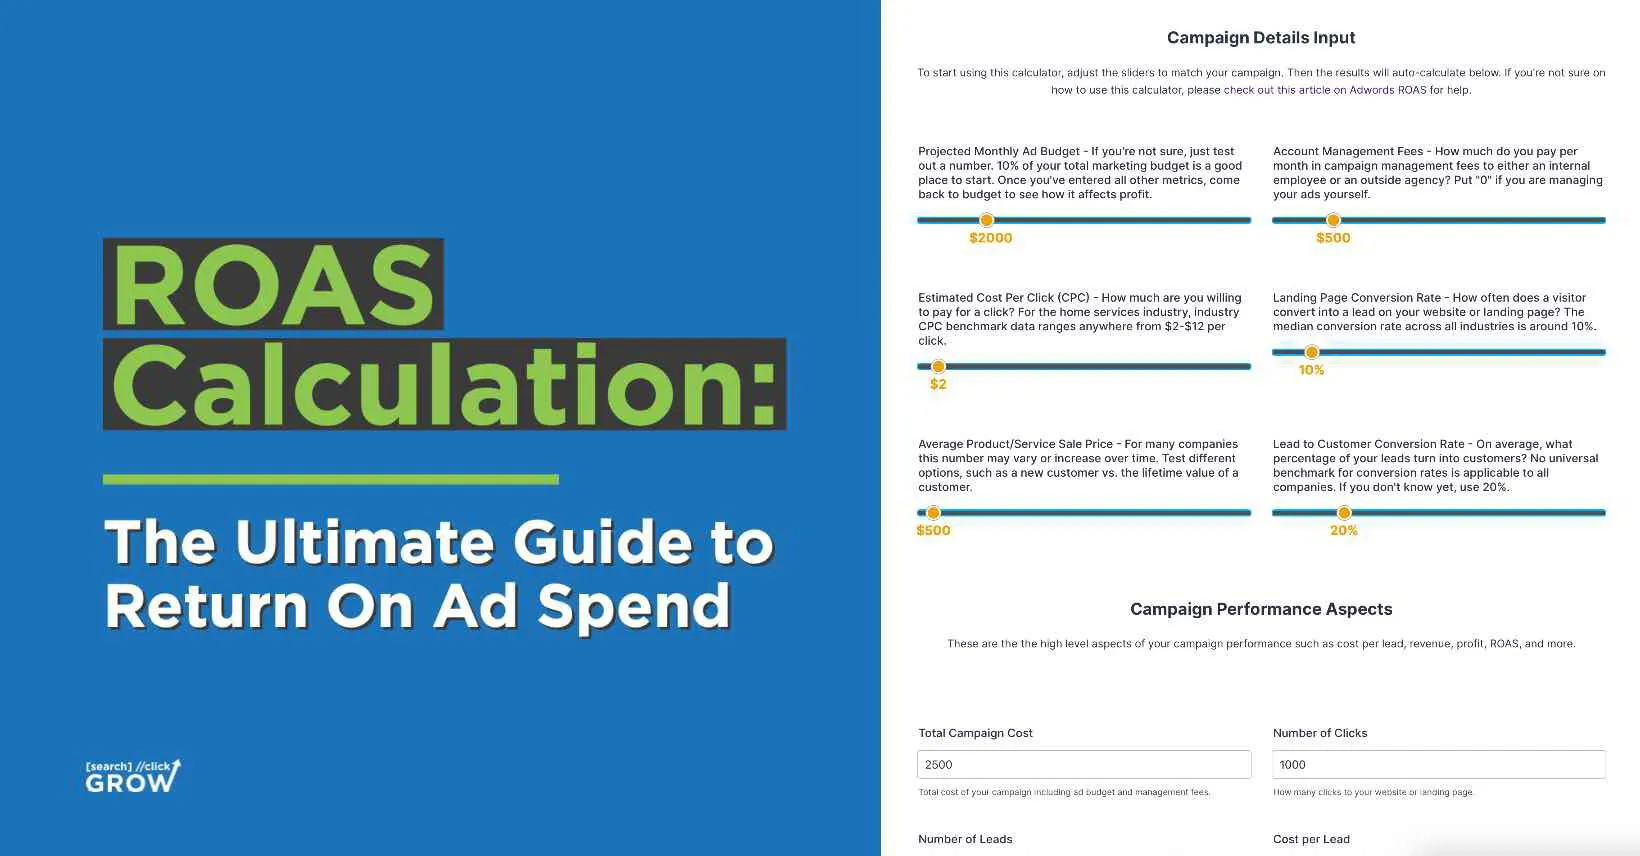 ROAS Calculation: The Ultimate Guide to Return On Ad Spend